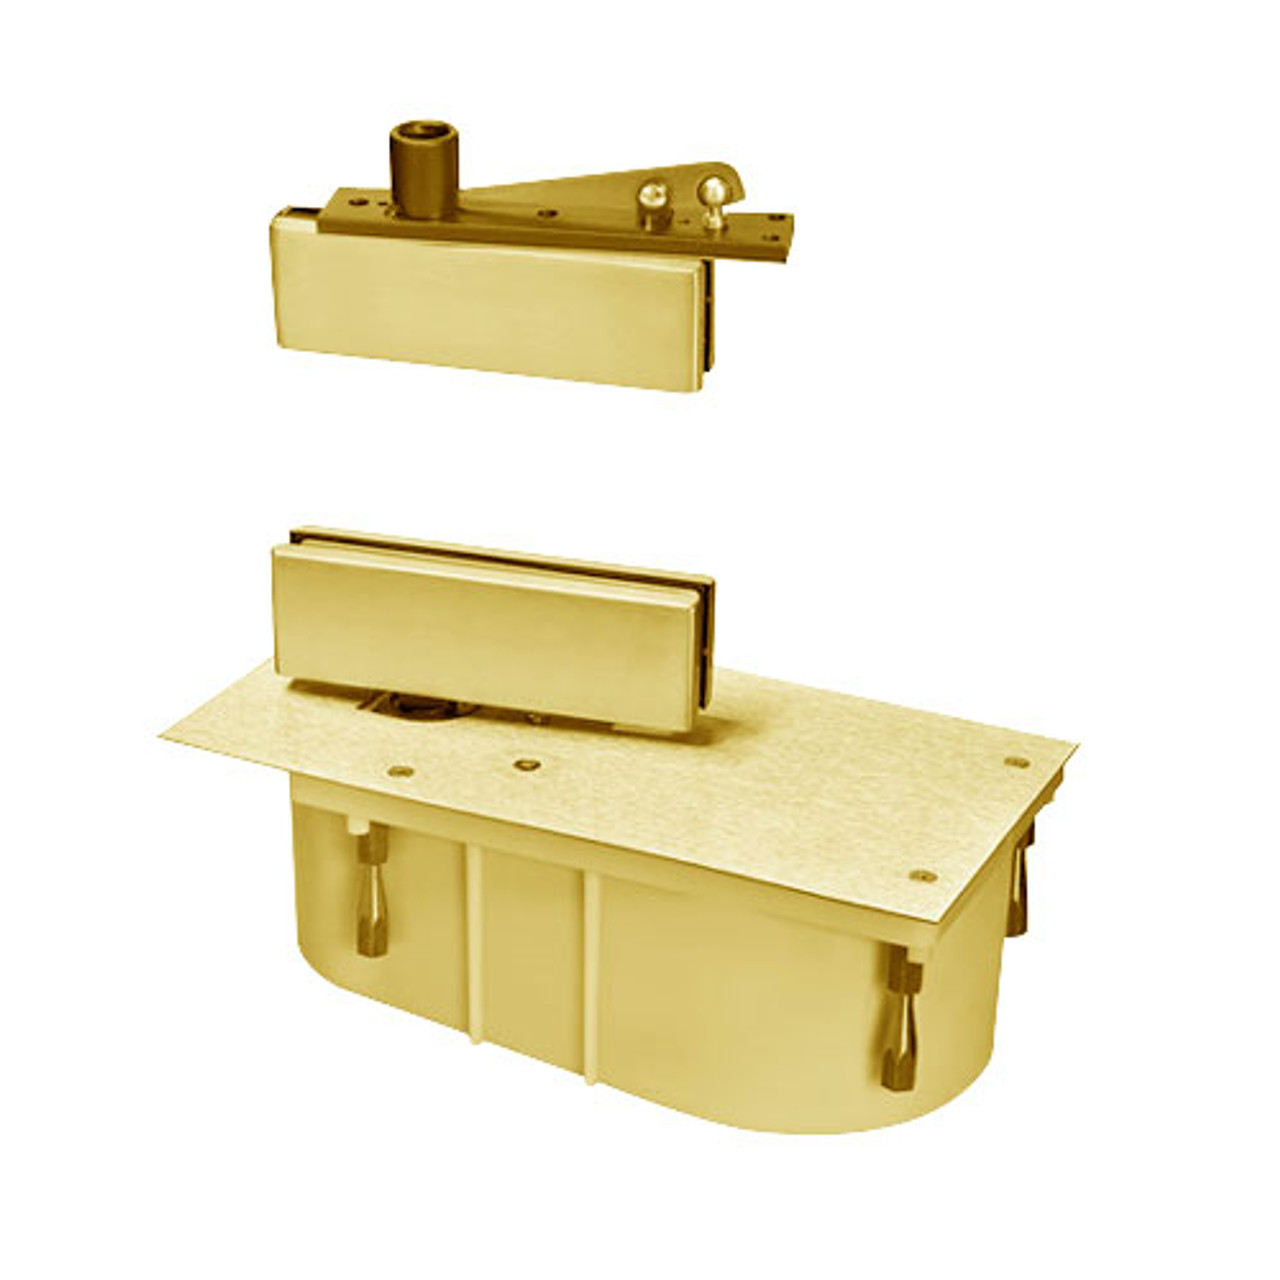 428-95S-LFP-RH-605 Rixson 428 Series Heavy Duty Single Acting Center Hung Floor Closer with Patch Fittings in Bright Brass Finish